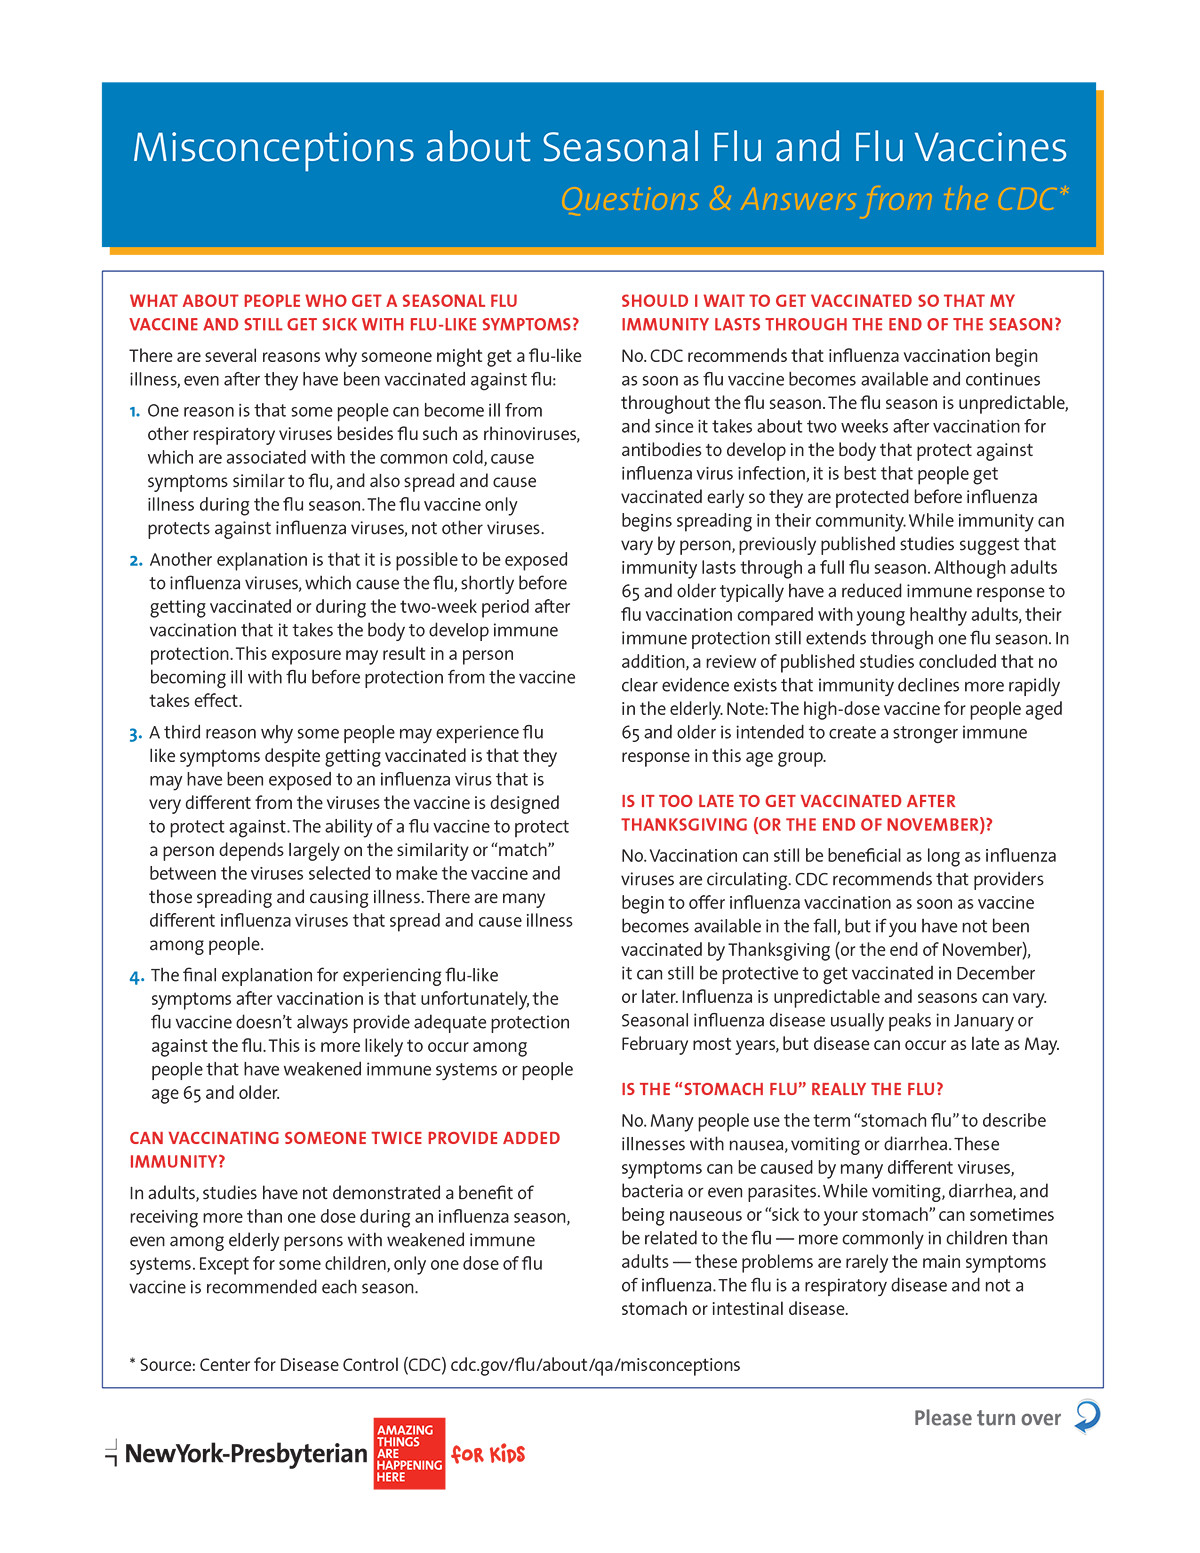 Misconceptions about Seasonal Flu and Flu Vaccines |Tip Sheets | NewYork-Presbyterian1200 x 1553